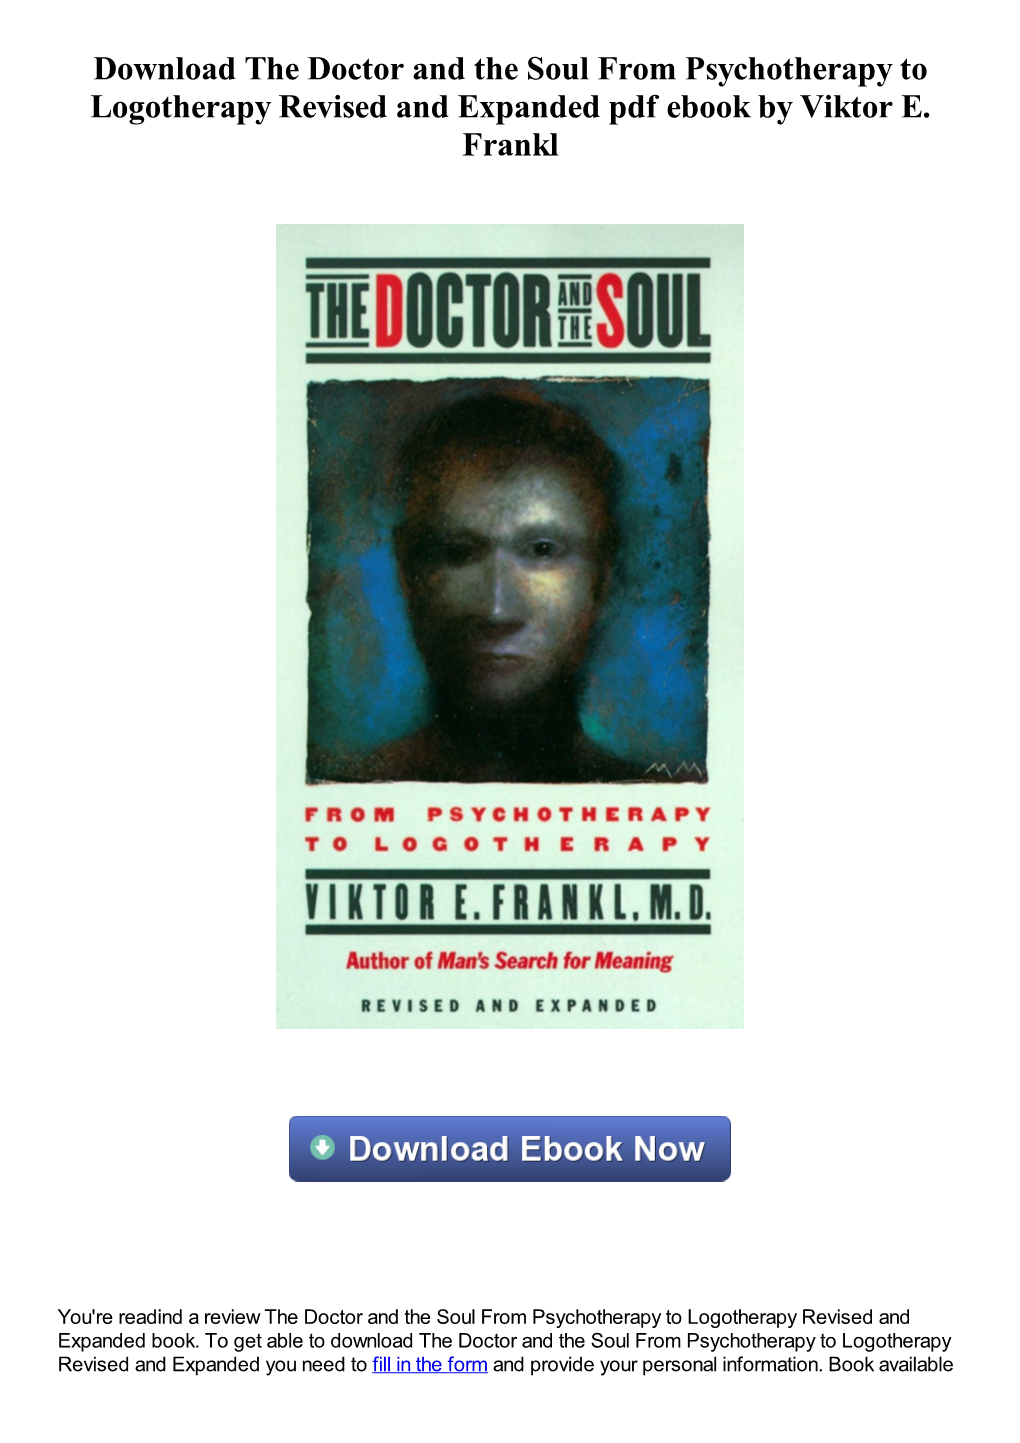 Download the Doctor and the Soul from Psychotherapy to Logotherapy Revised and Expanded Pdf Ebook by Viktor E. Frankl